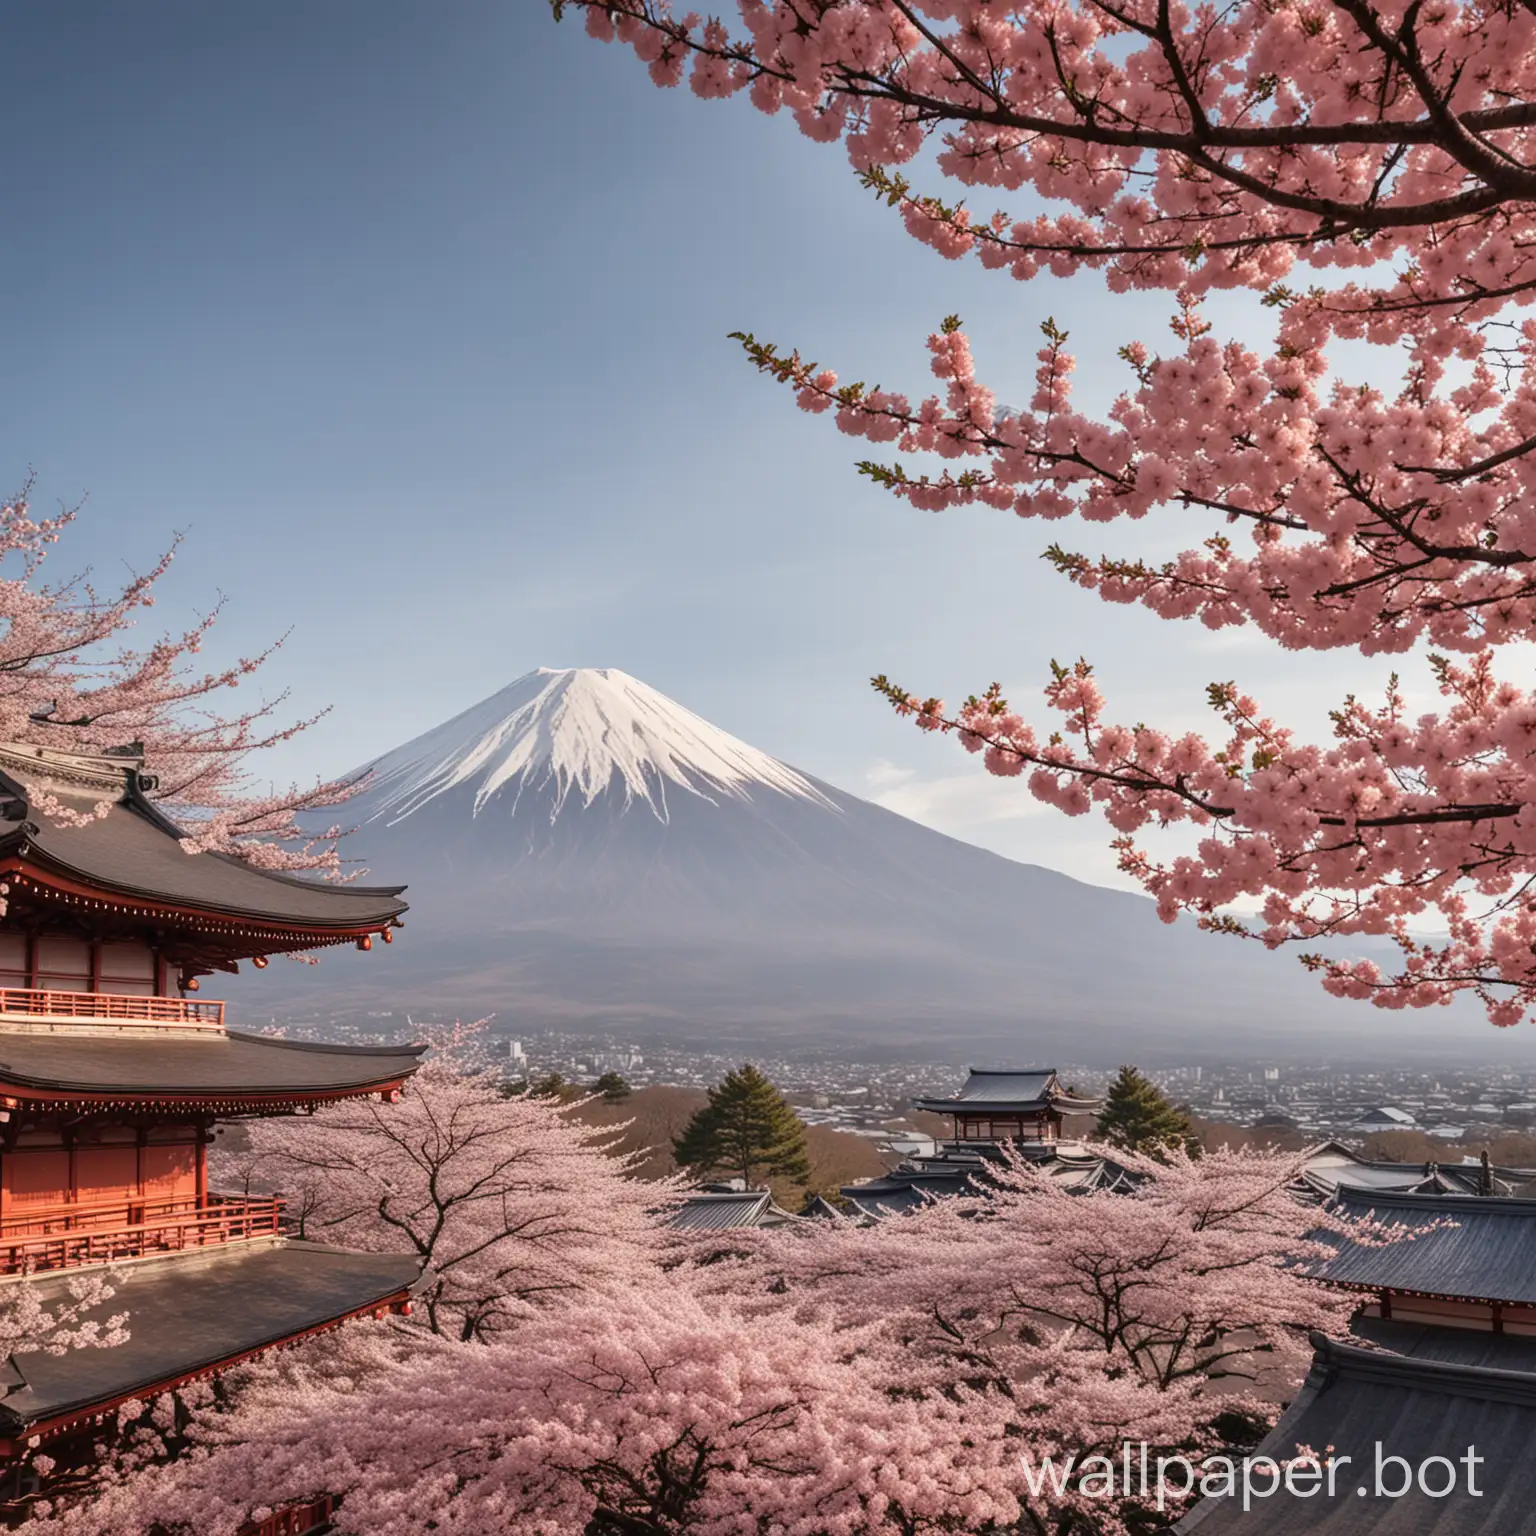 create an image of Mount Fuji of Japan behind a traditional temple with cherry blossom in front